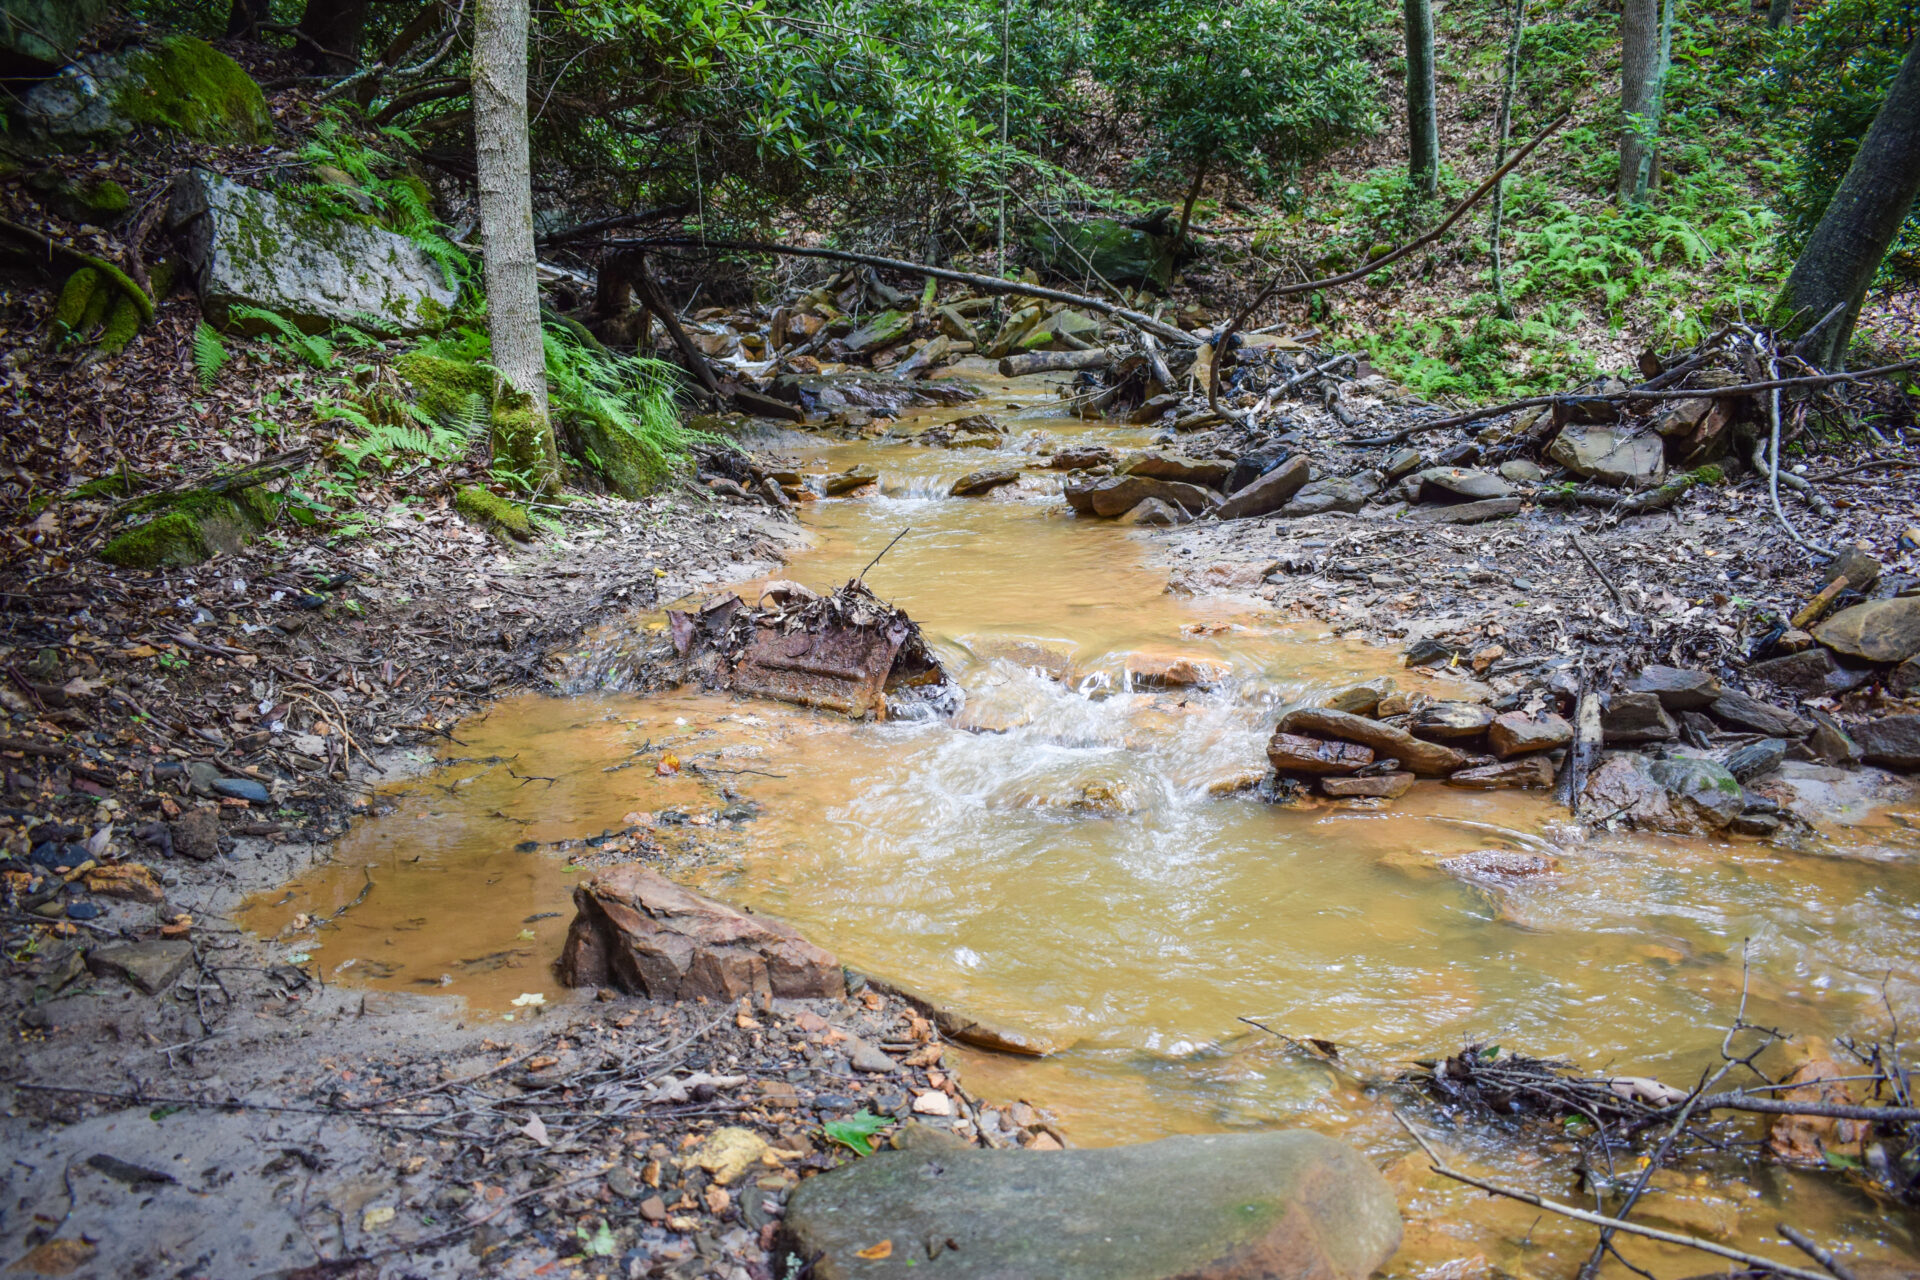 A small mountain stream flowing through the Appalachian Mountains in Pennsylvania that has been degraded by coal mining.